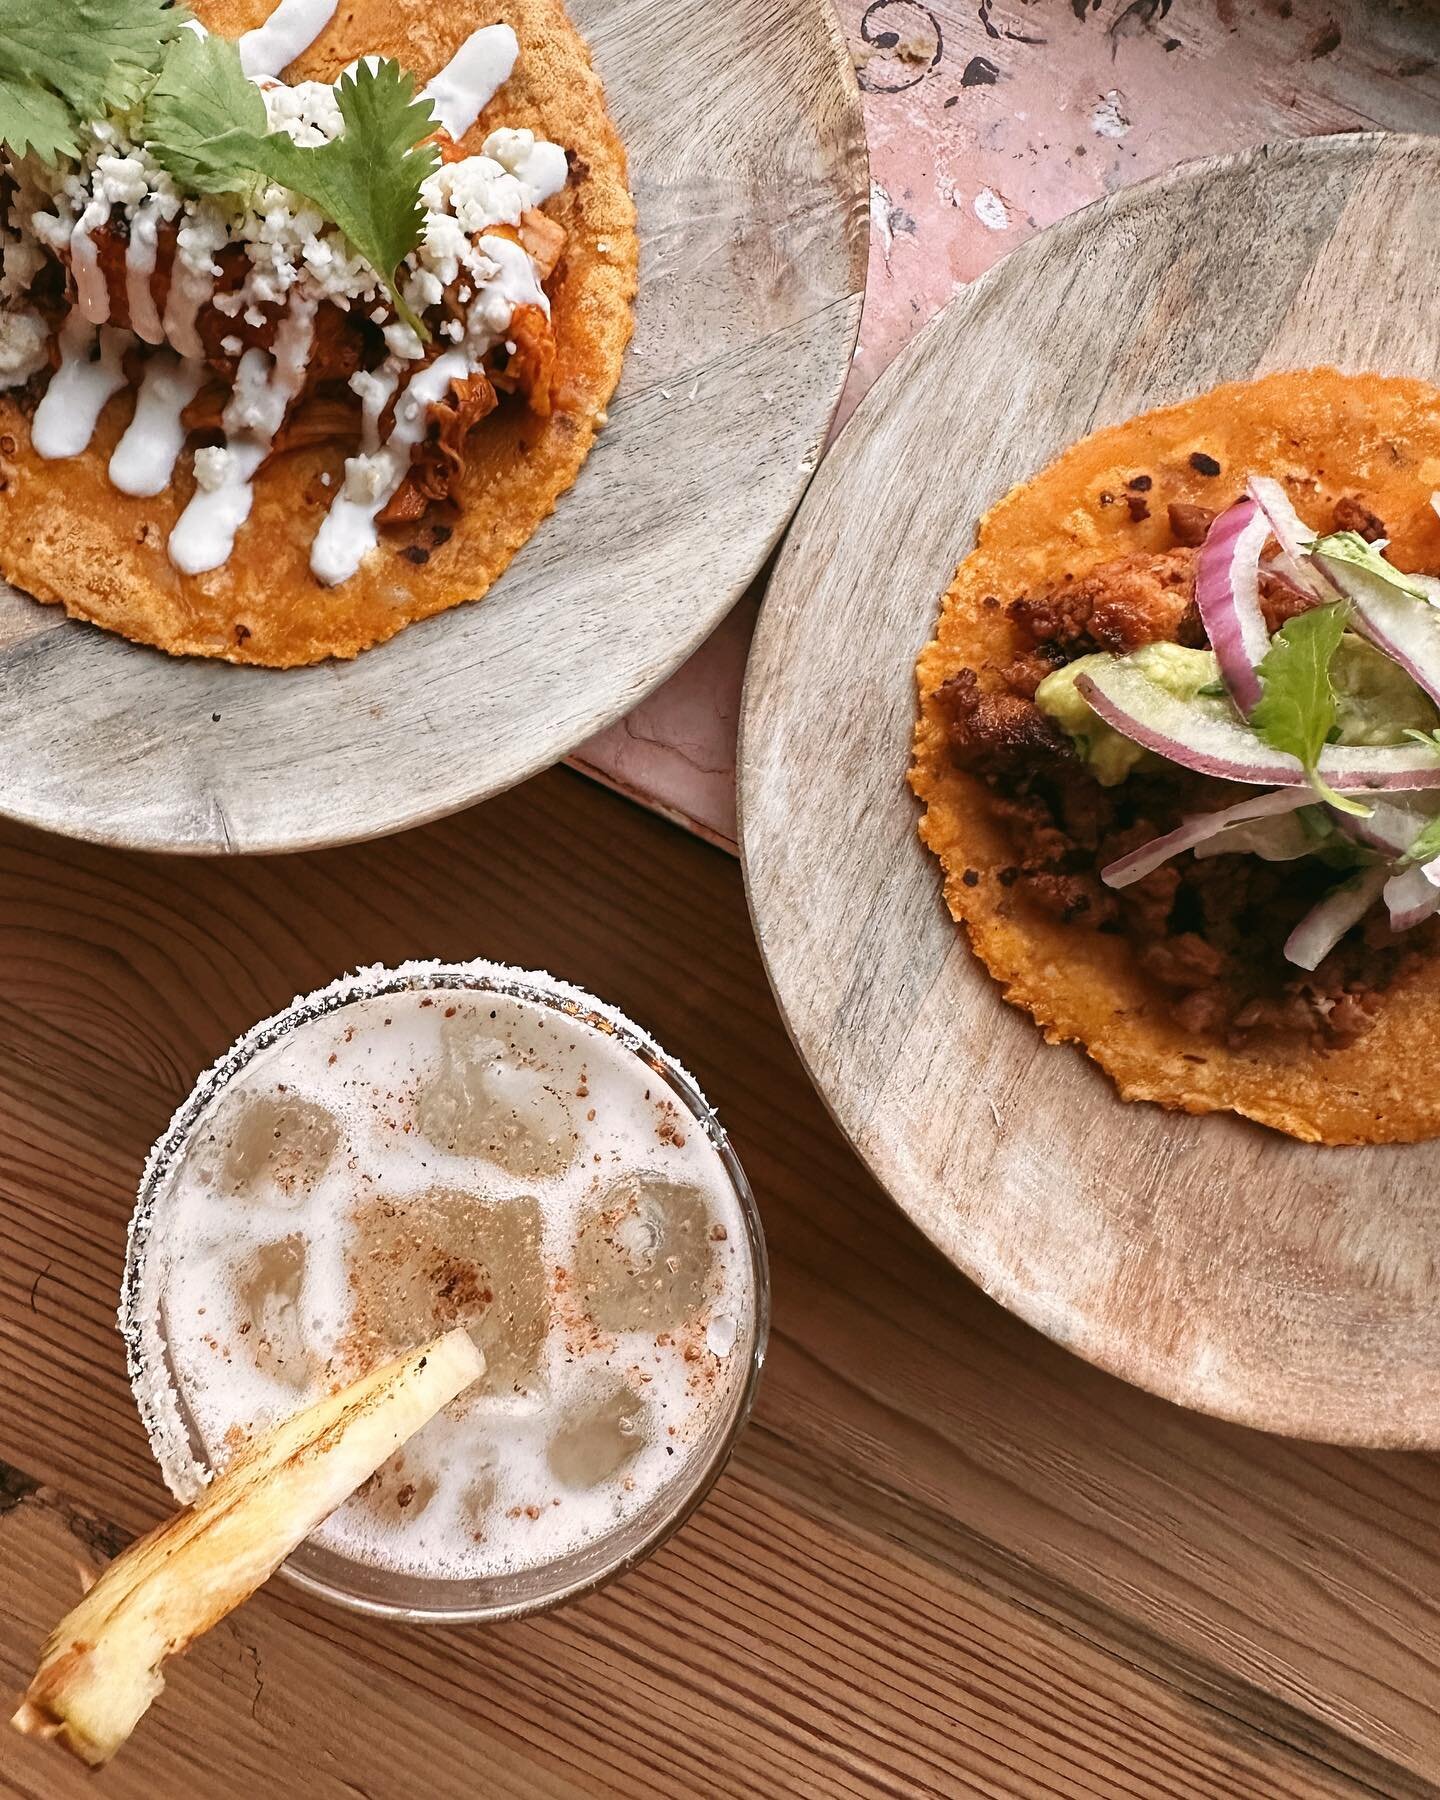 Chicken + Chorizo 🌮 / Baked 🍍 Marg

Taco Tuesday&hellip; and all&rsquo;s right with the world 😌